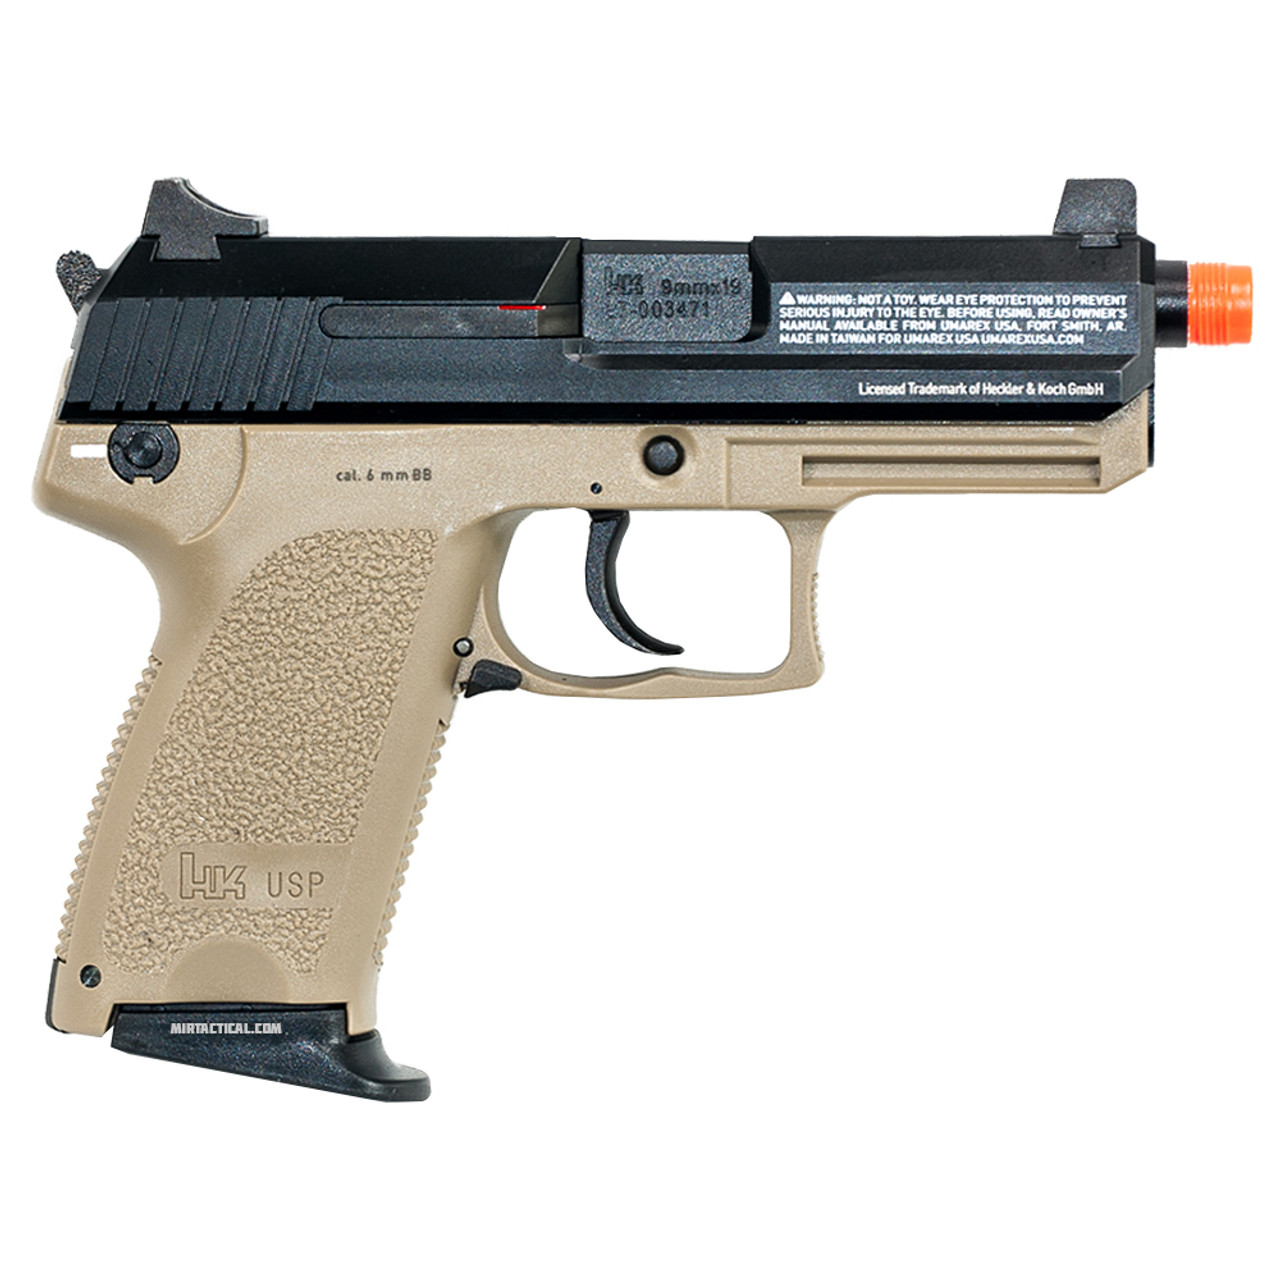 H&K Full Metal USP Compact Tactical Gas Blowback Airsoft Pistol by